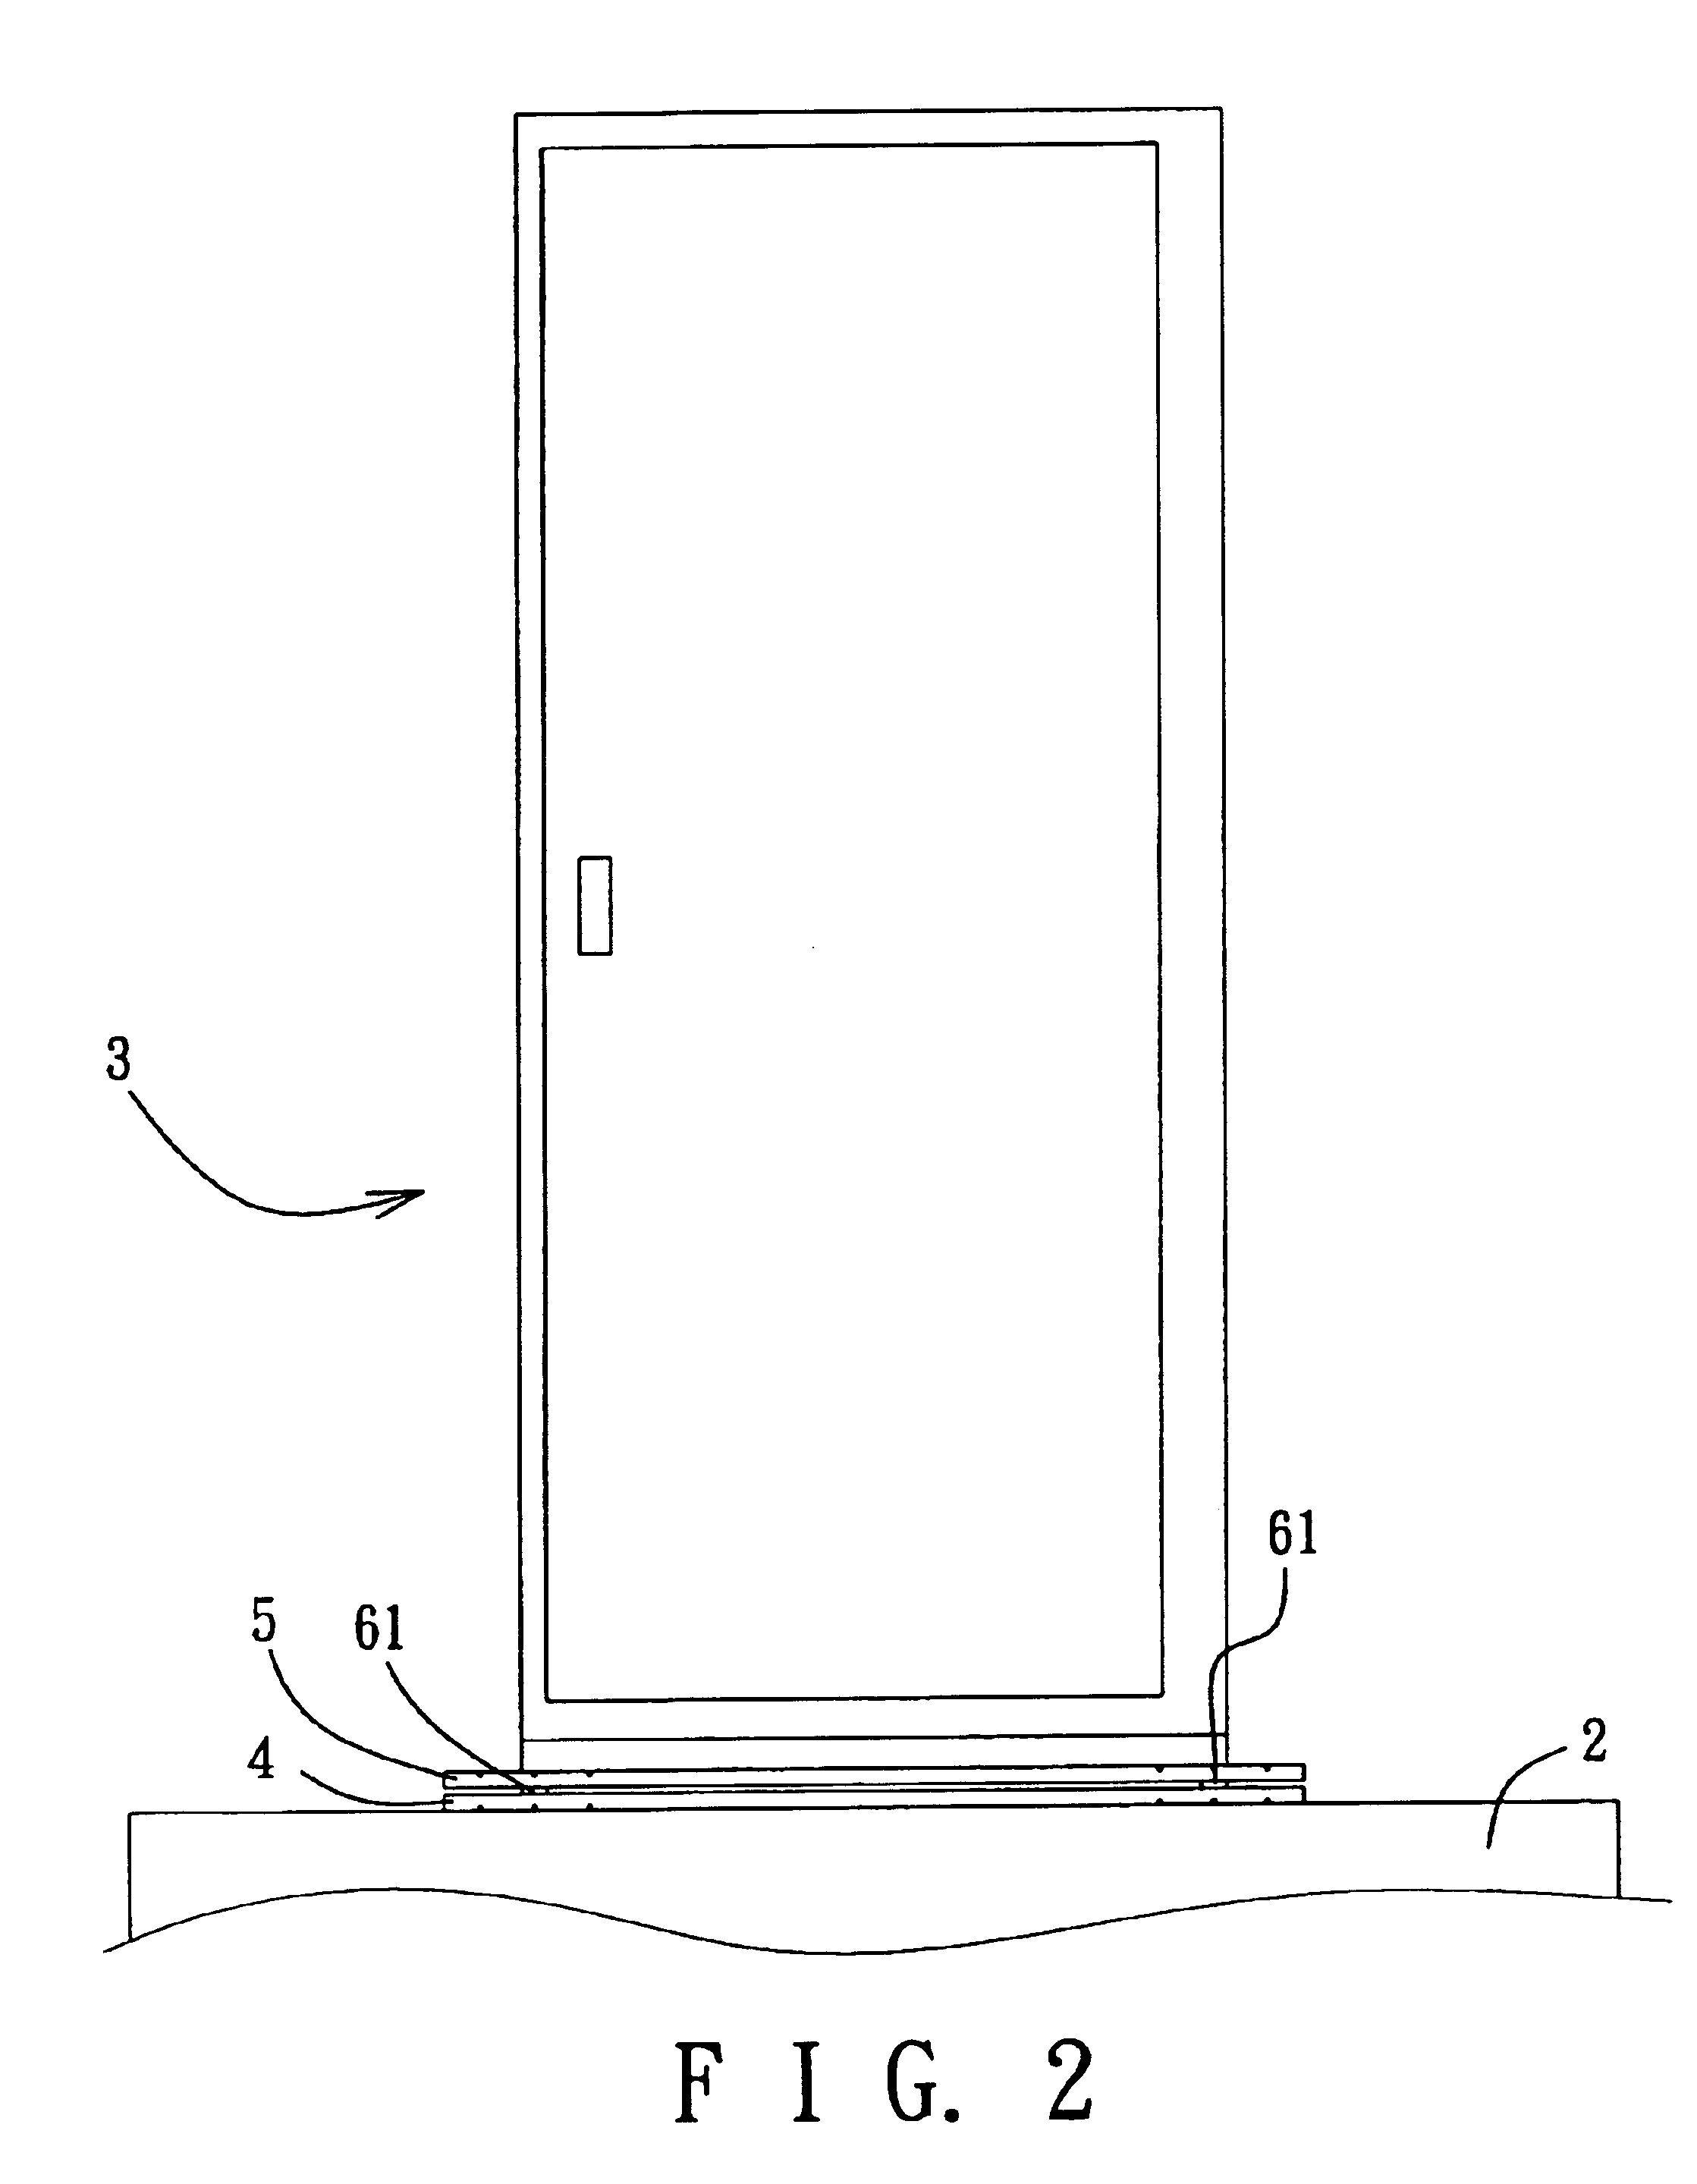 Seismic isolation bearing assembly with a frame unit for supporting a machine body thereon